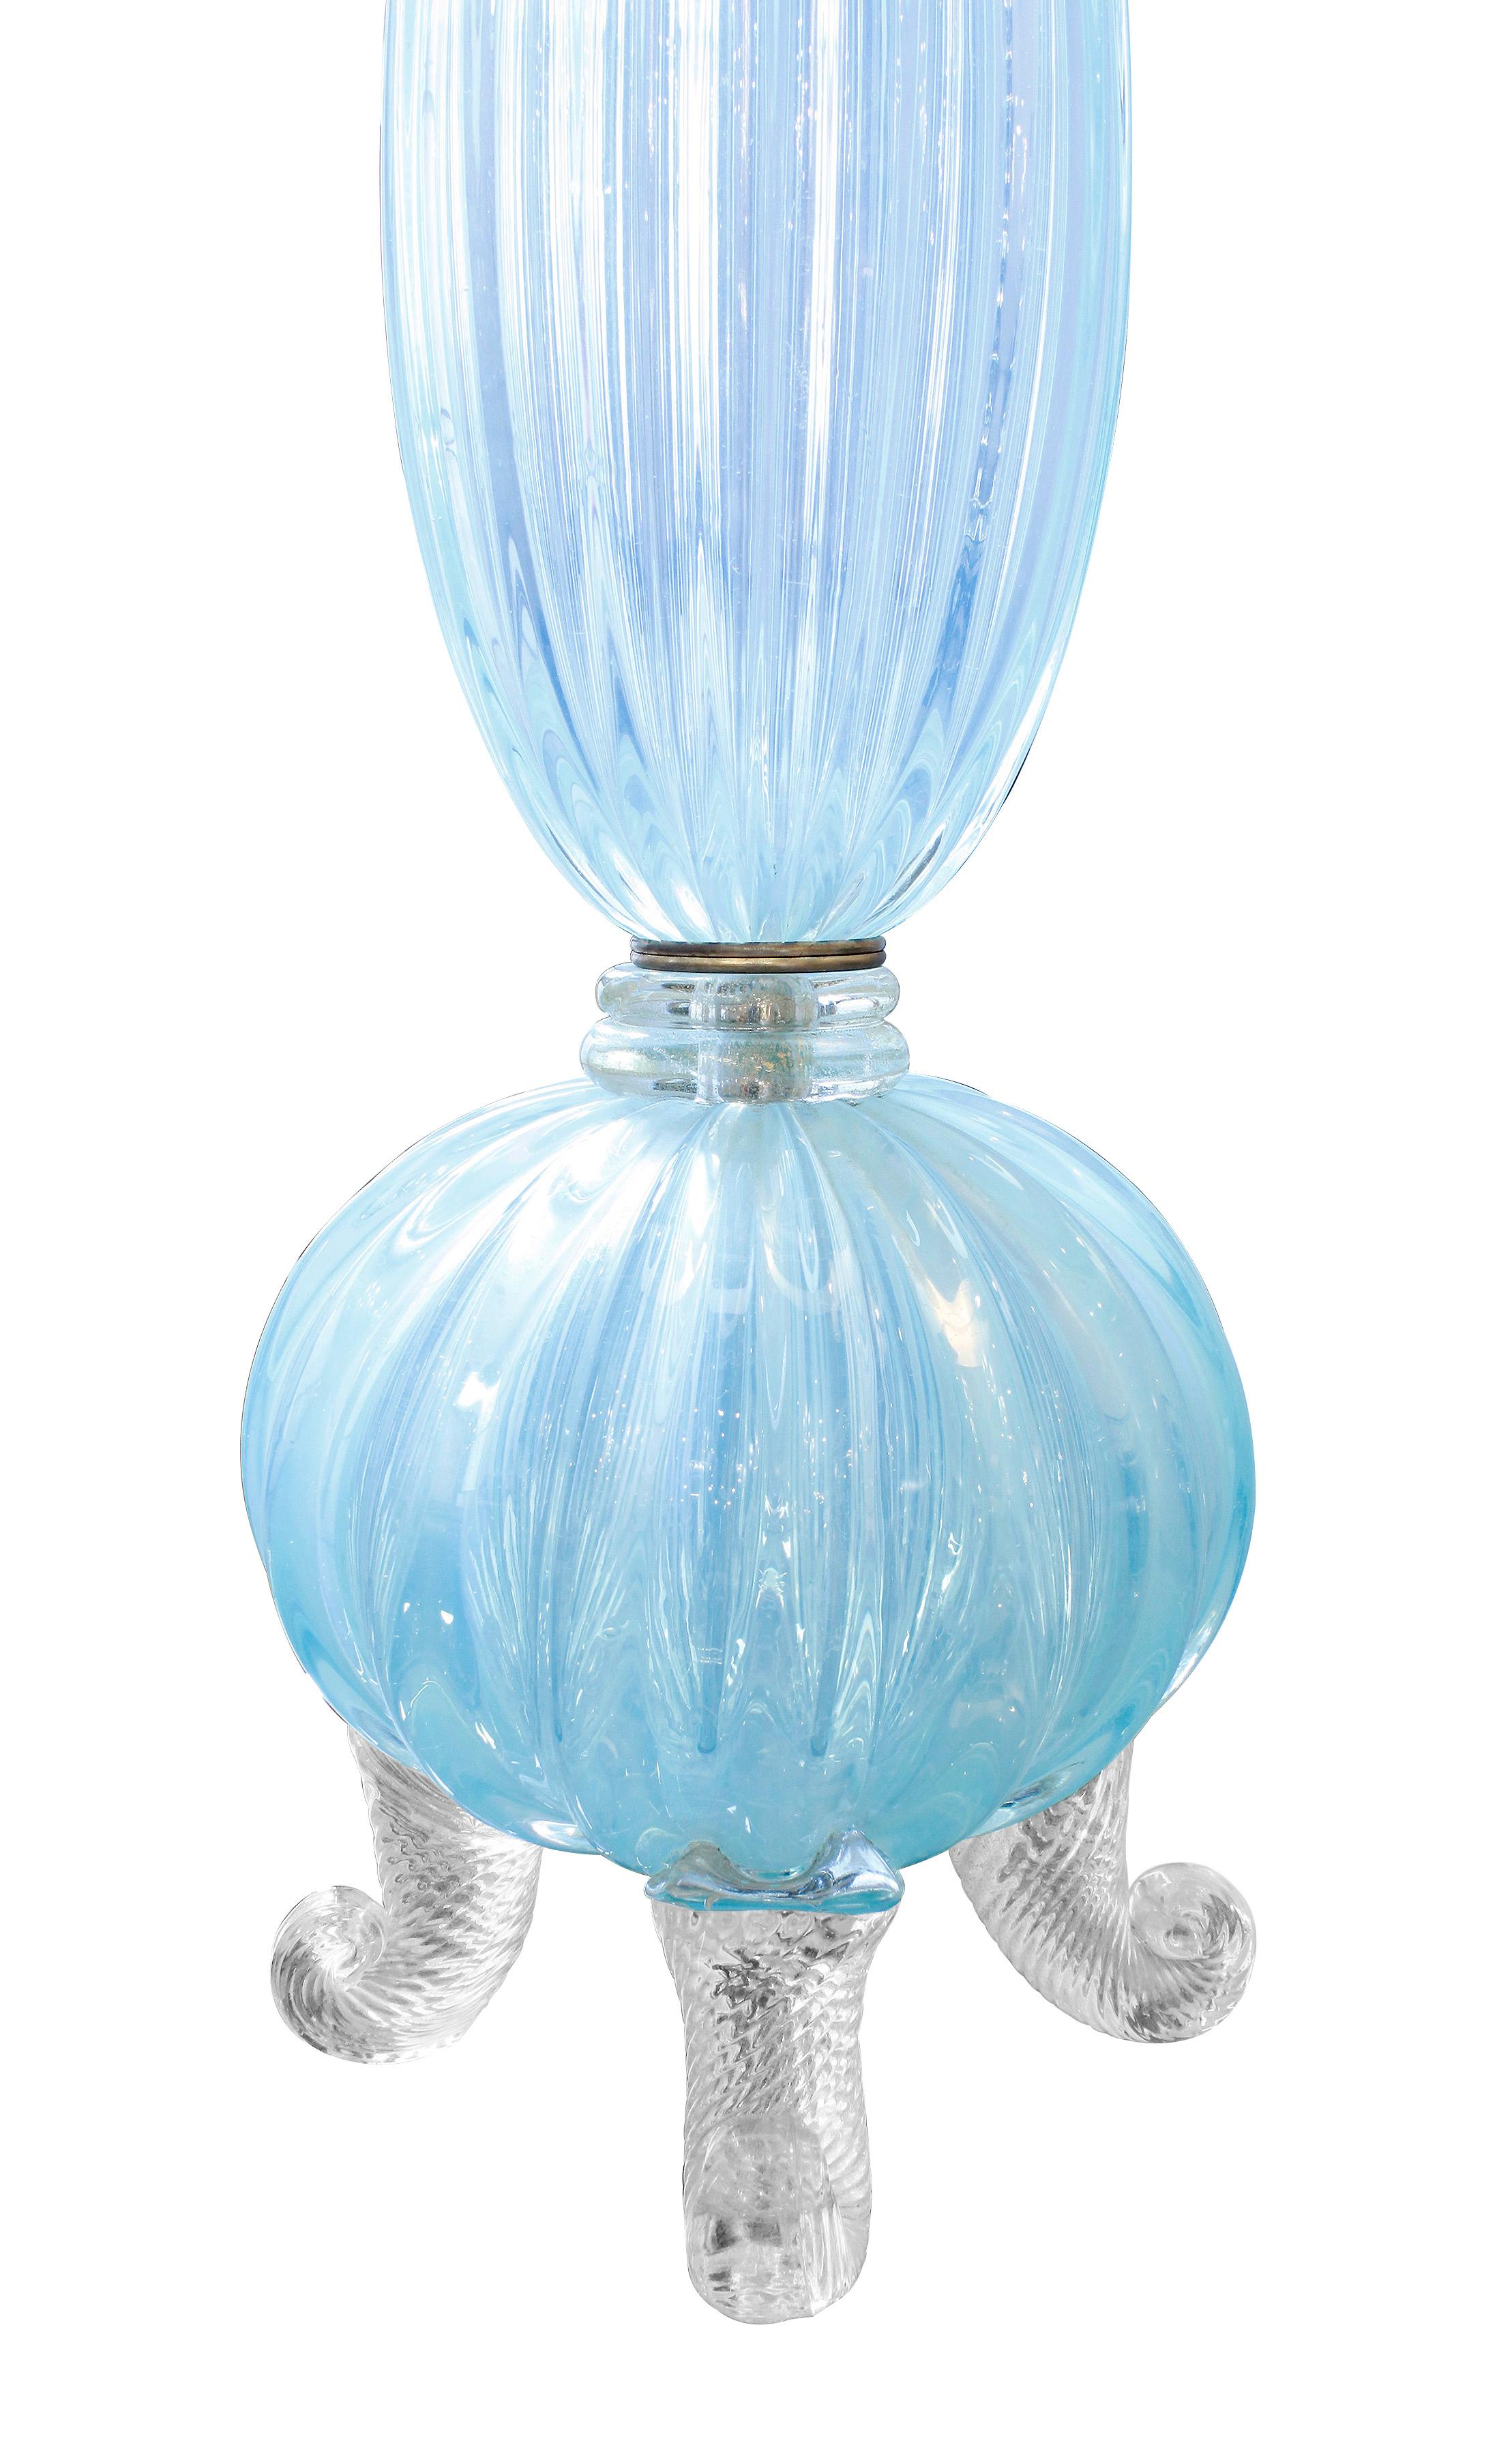 Italian Barovier & Toso Stunning Monumental Hand-Blown Blue Glass Table Lamp 1950s For Sale